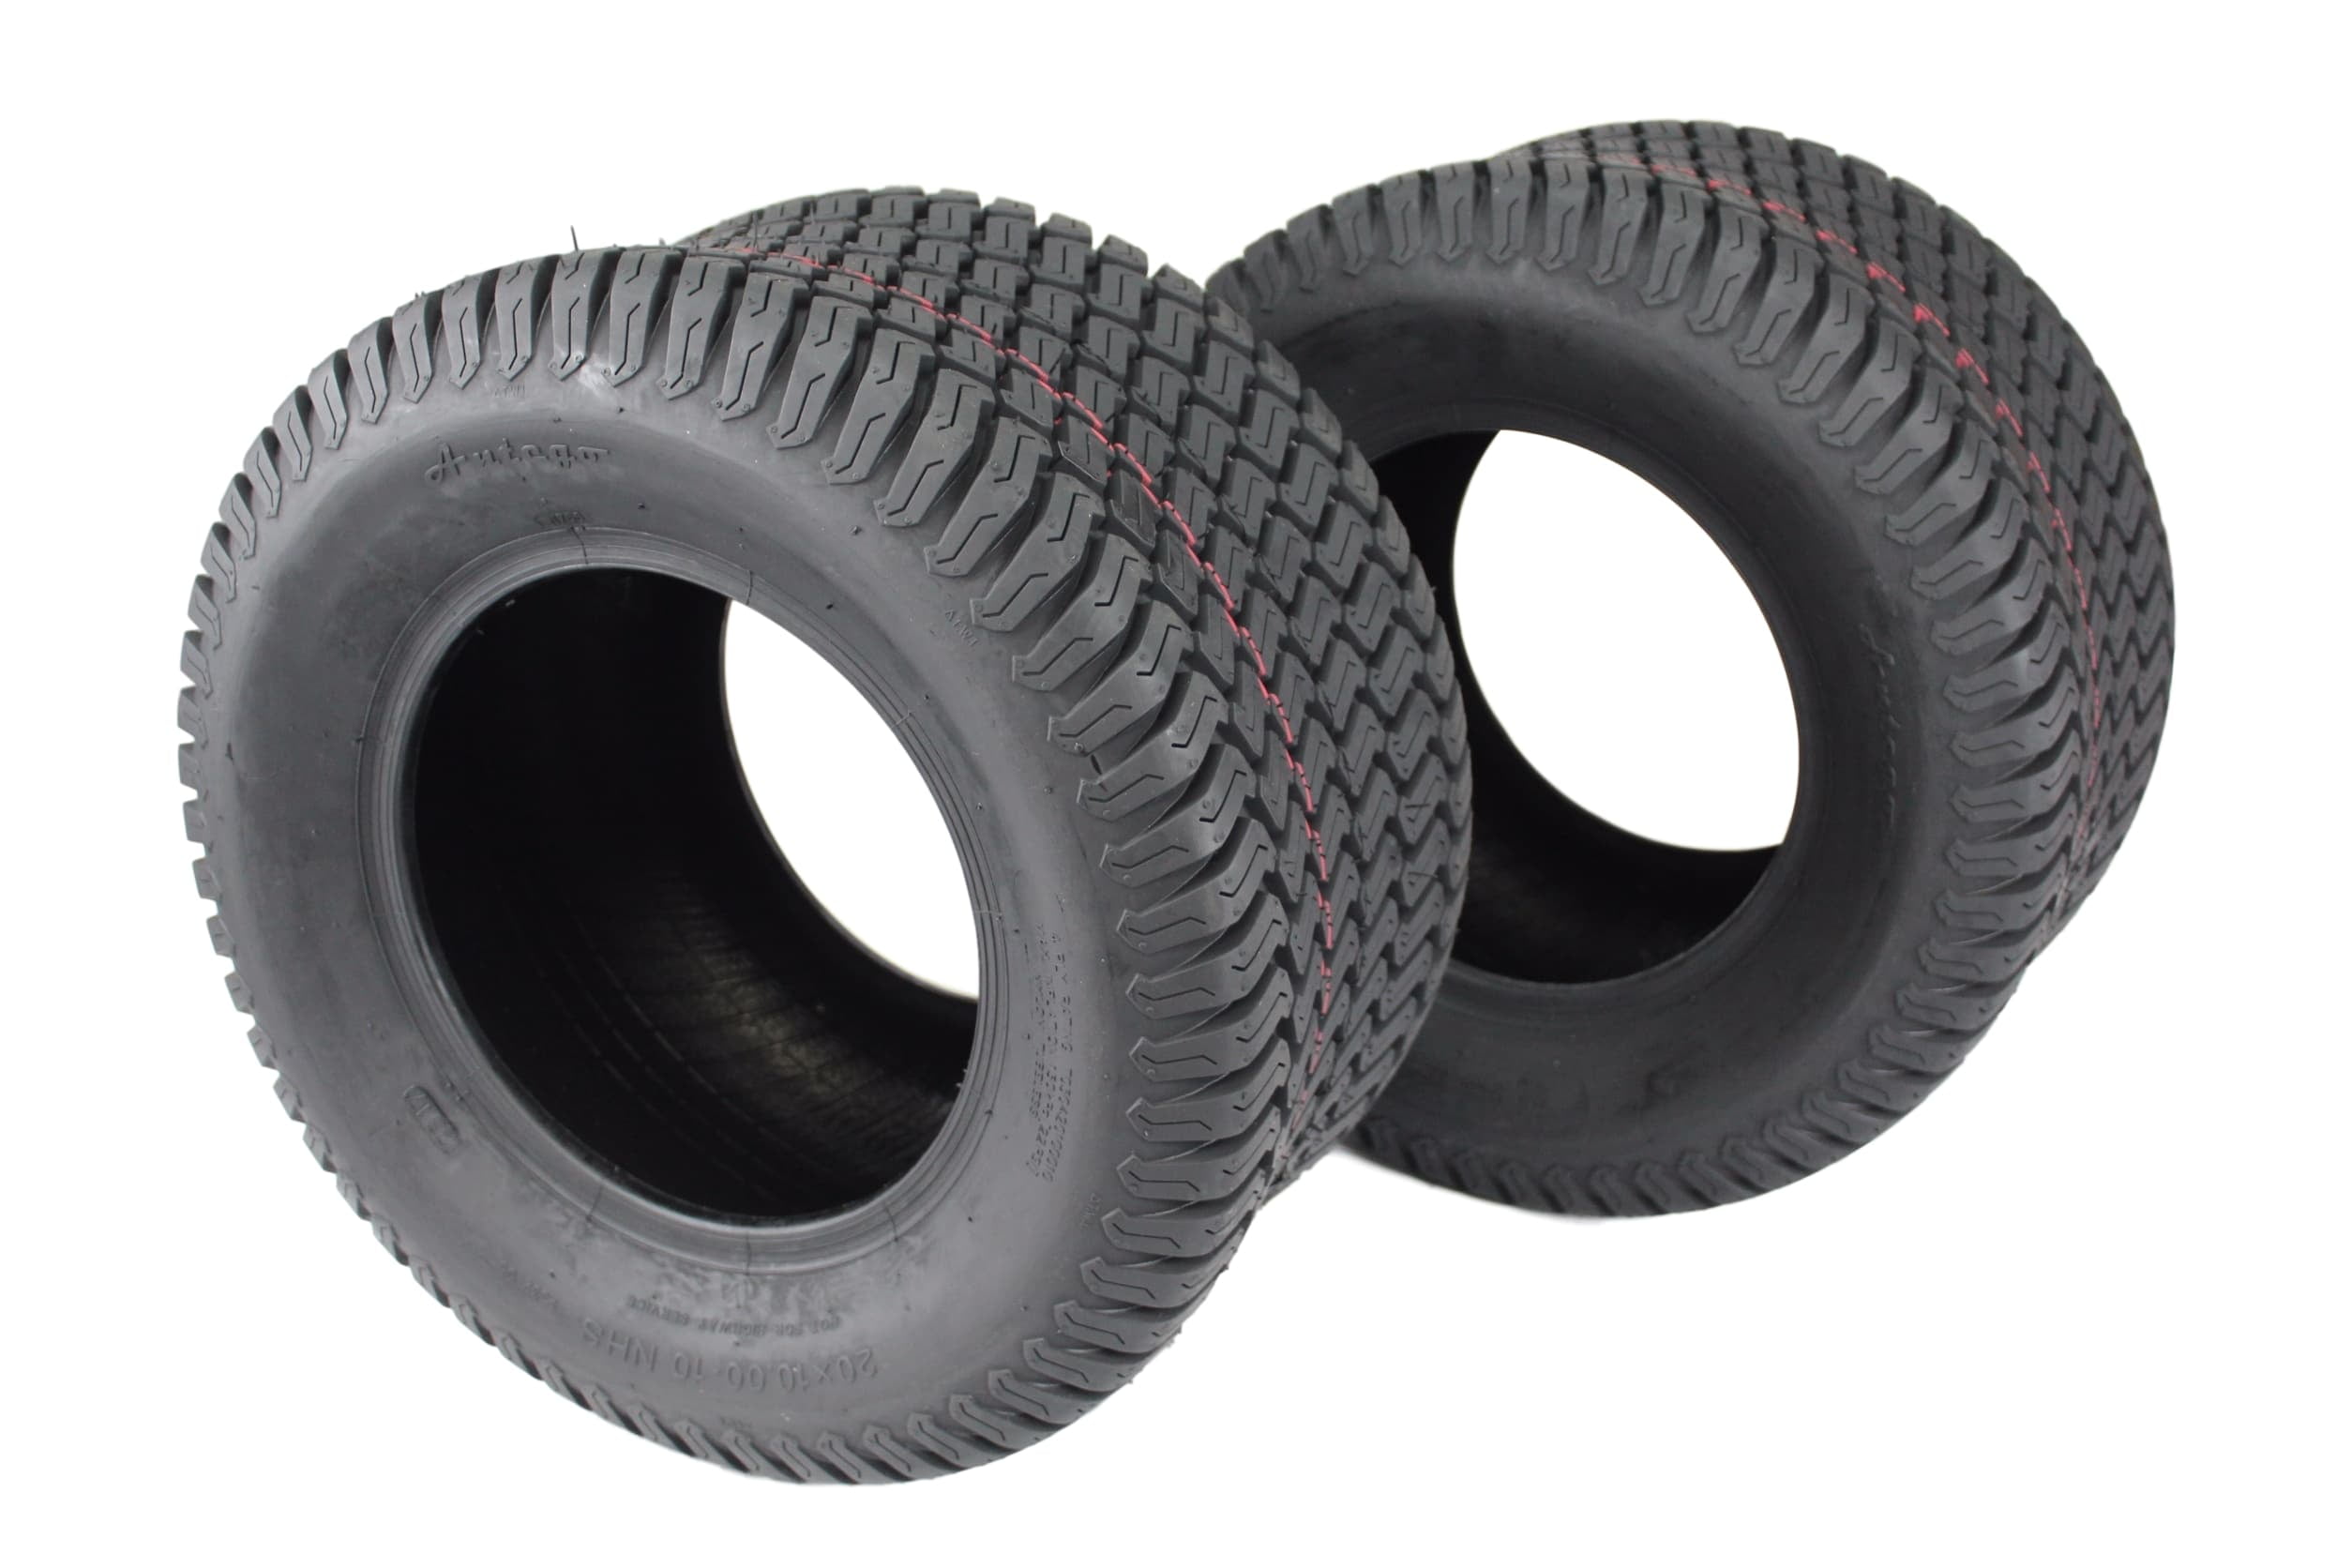 TWO 20X10.00-10 Lawn Tractor 20X10-10 4 Ply Rated Lawn Mower Set of Two Tires 